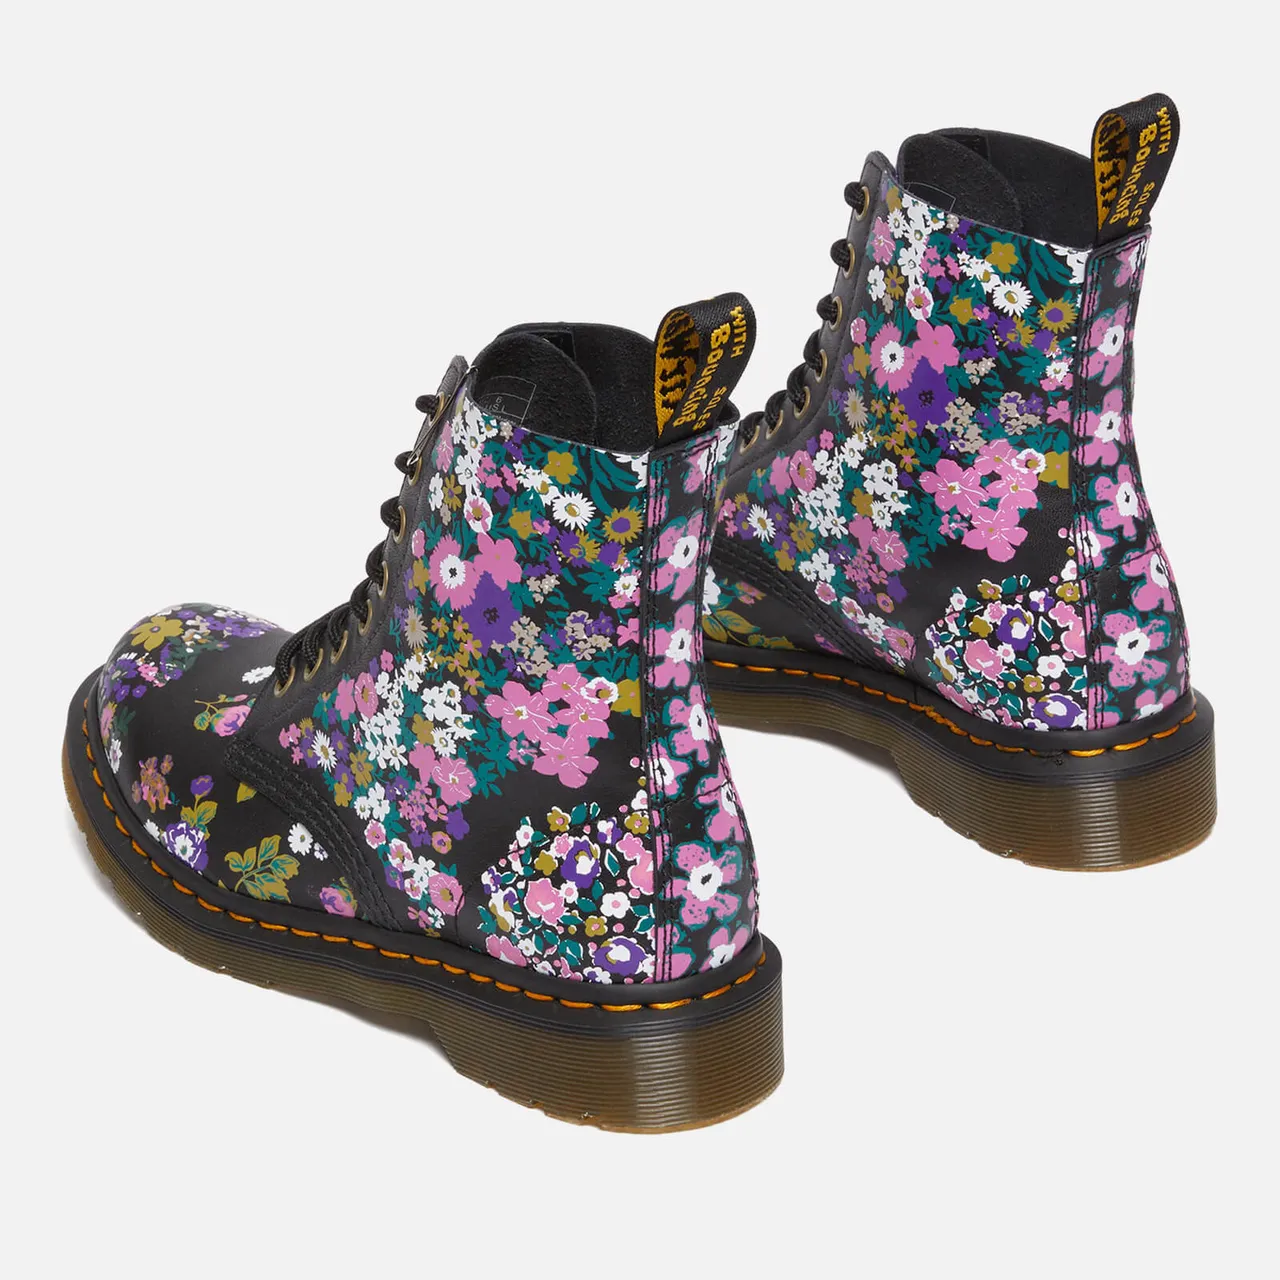 Dr. Martens Women's 1460 Pascal Leather 8-Eye Boots - UK